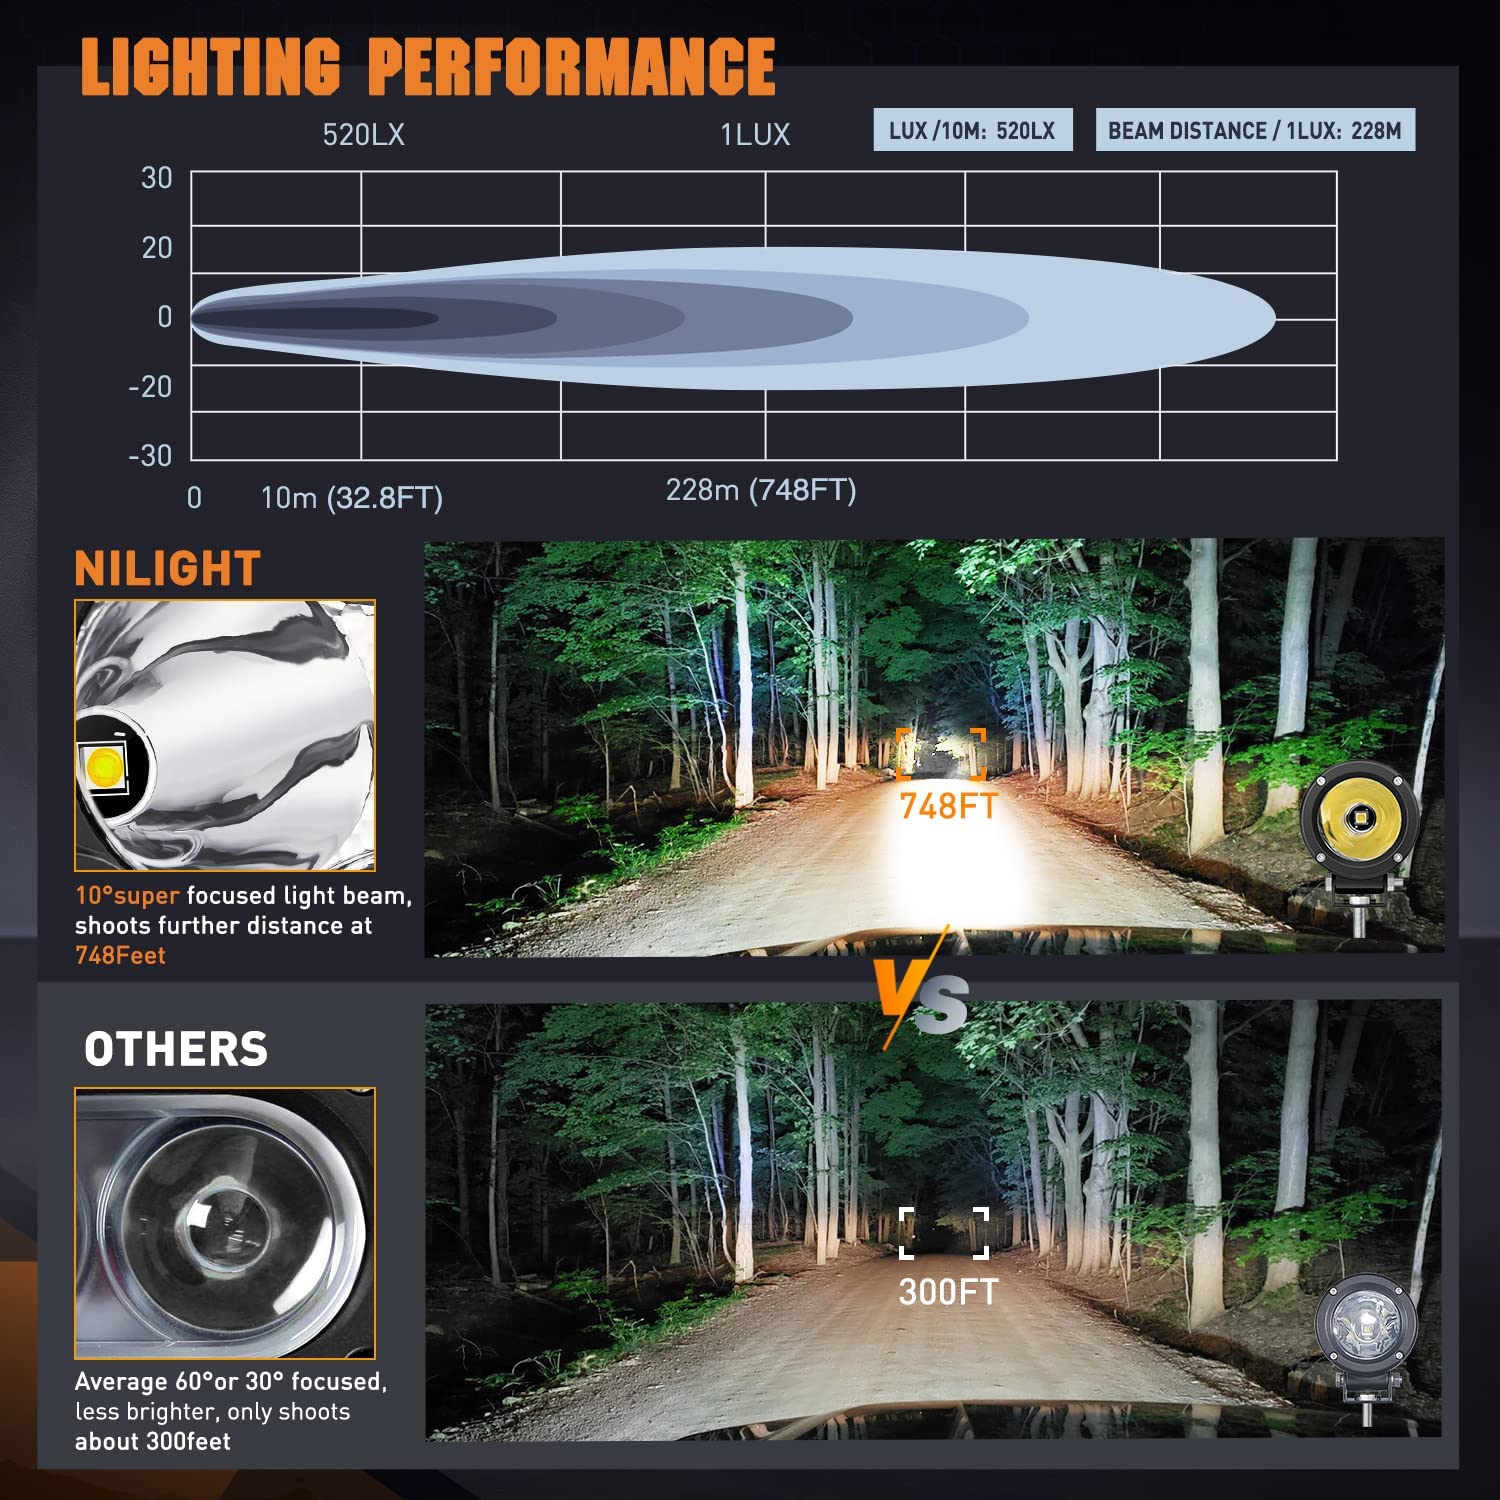 3" 10W 1065LM Spot Round Built-in EMC LED Work Lights (Pair) Nilight